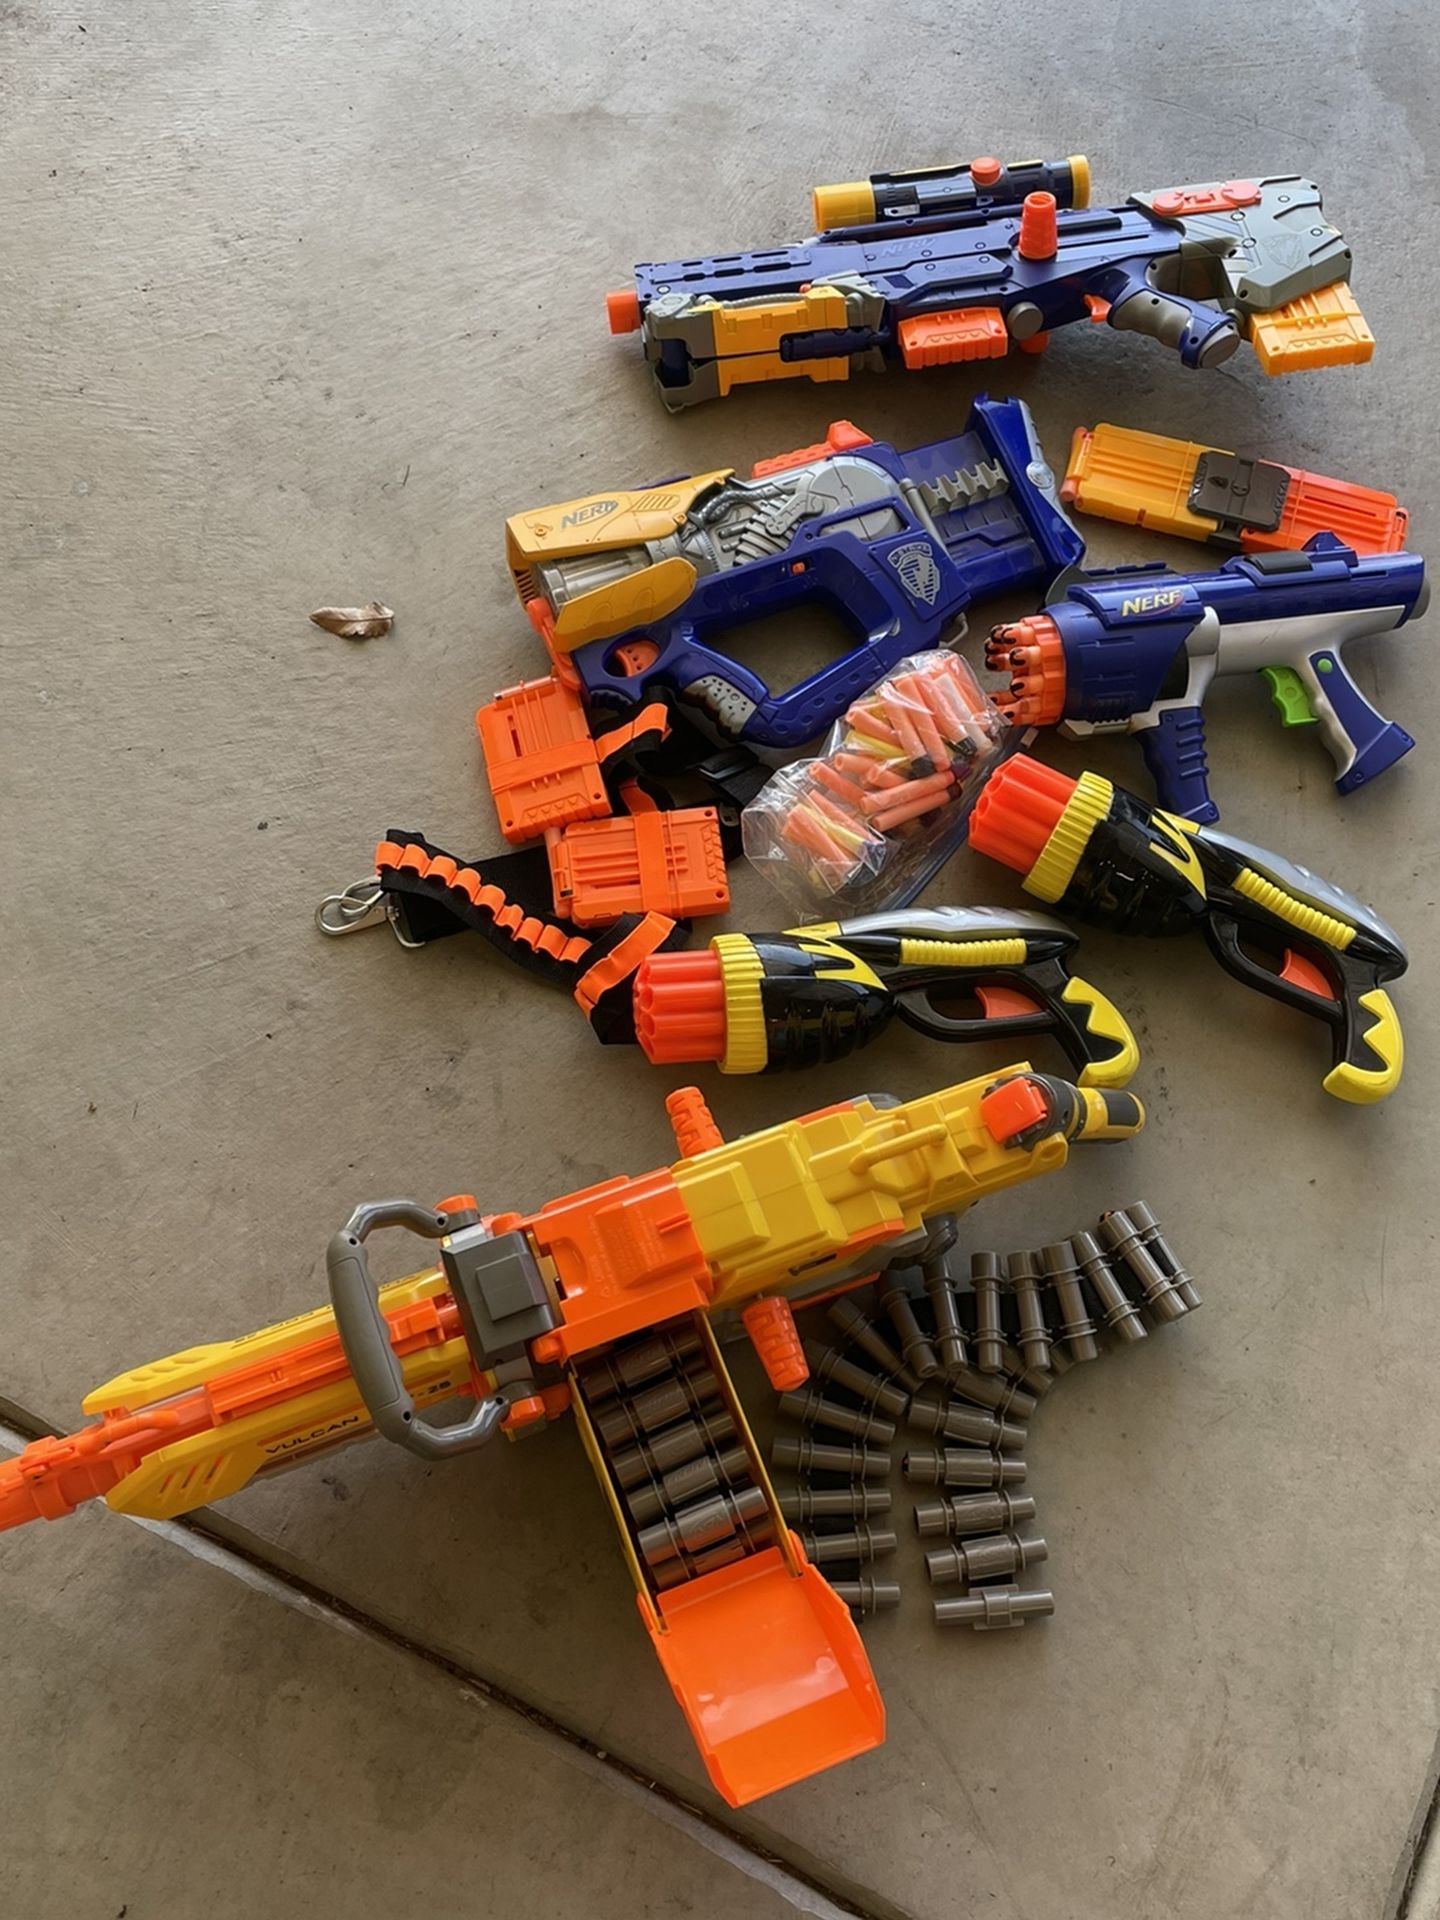 Nerf Guns Extra Bullets And Waist Belt $60 For All